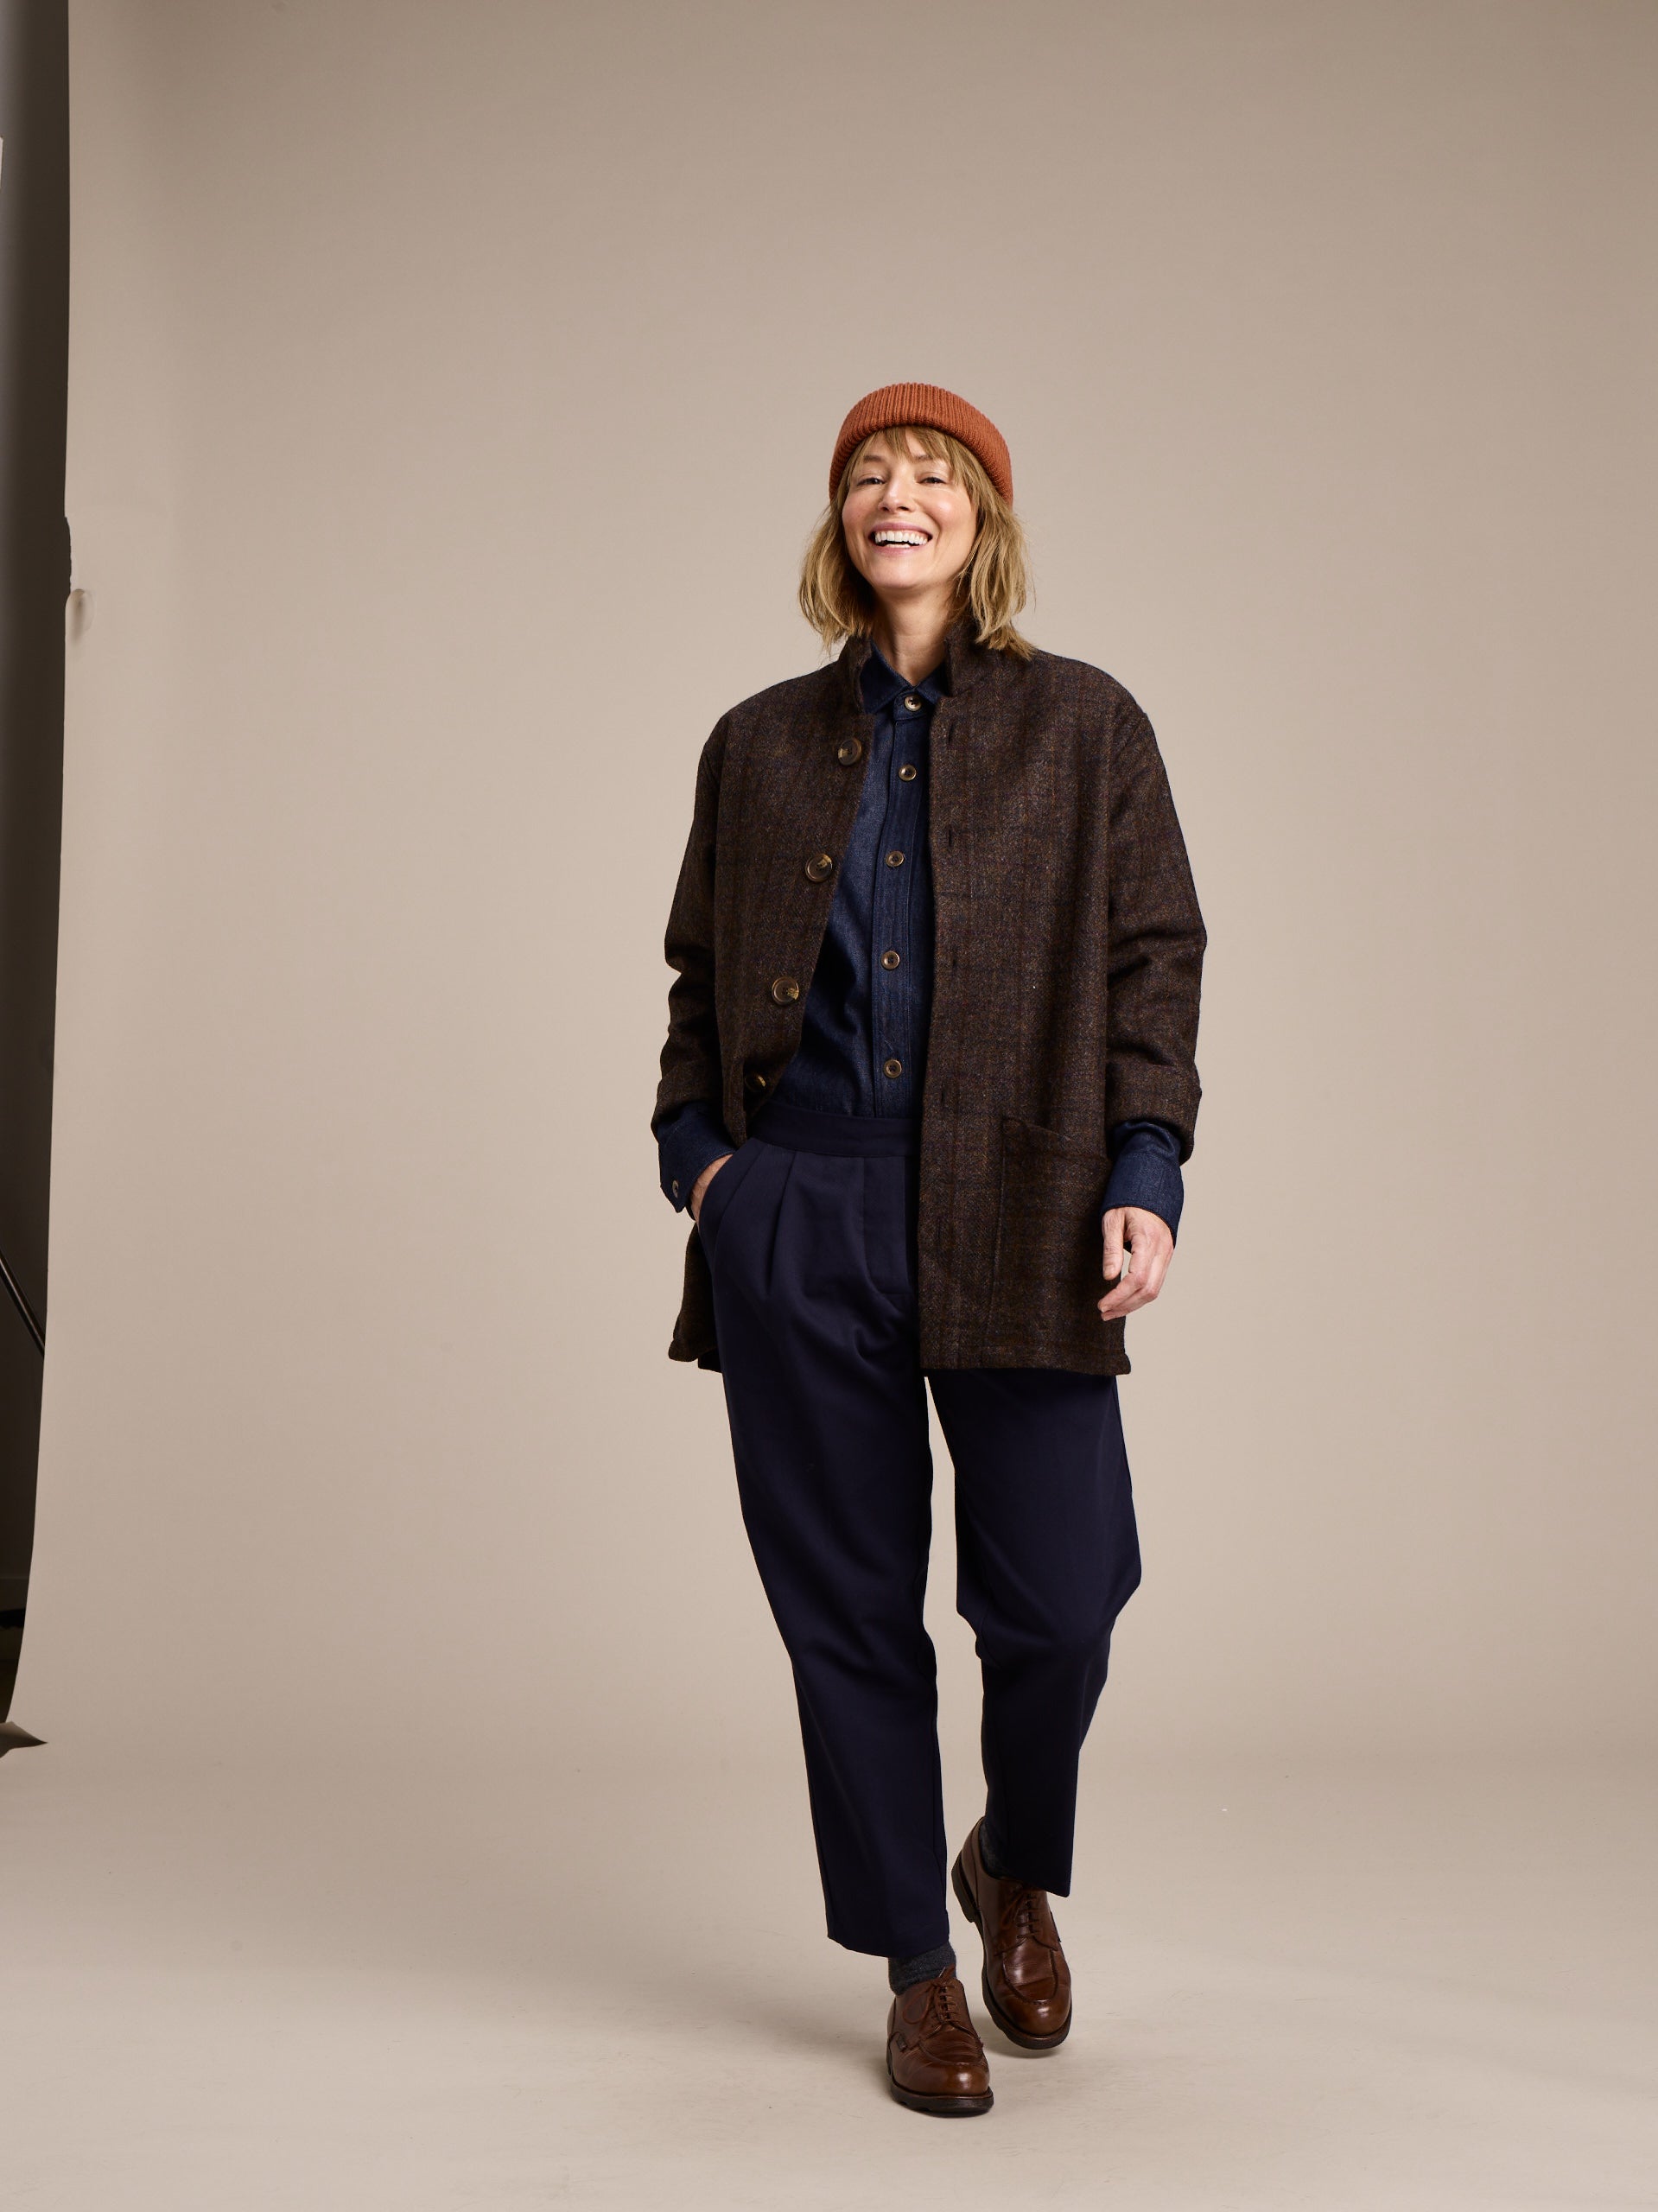 Woman in Carrier Company Denim Collar Shirt with Wool Hat Irish Wool Jacket and Cropped Trouser